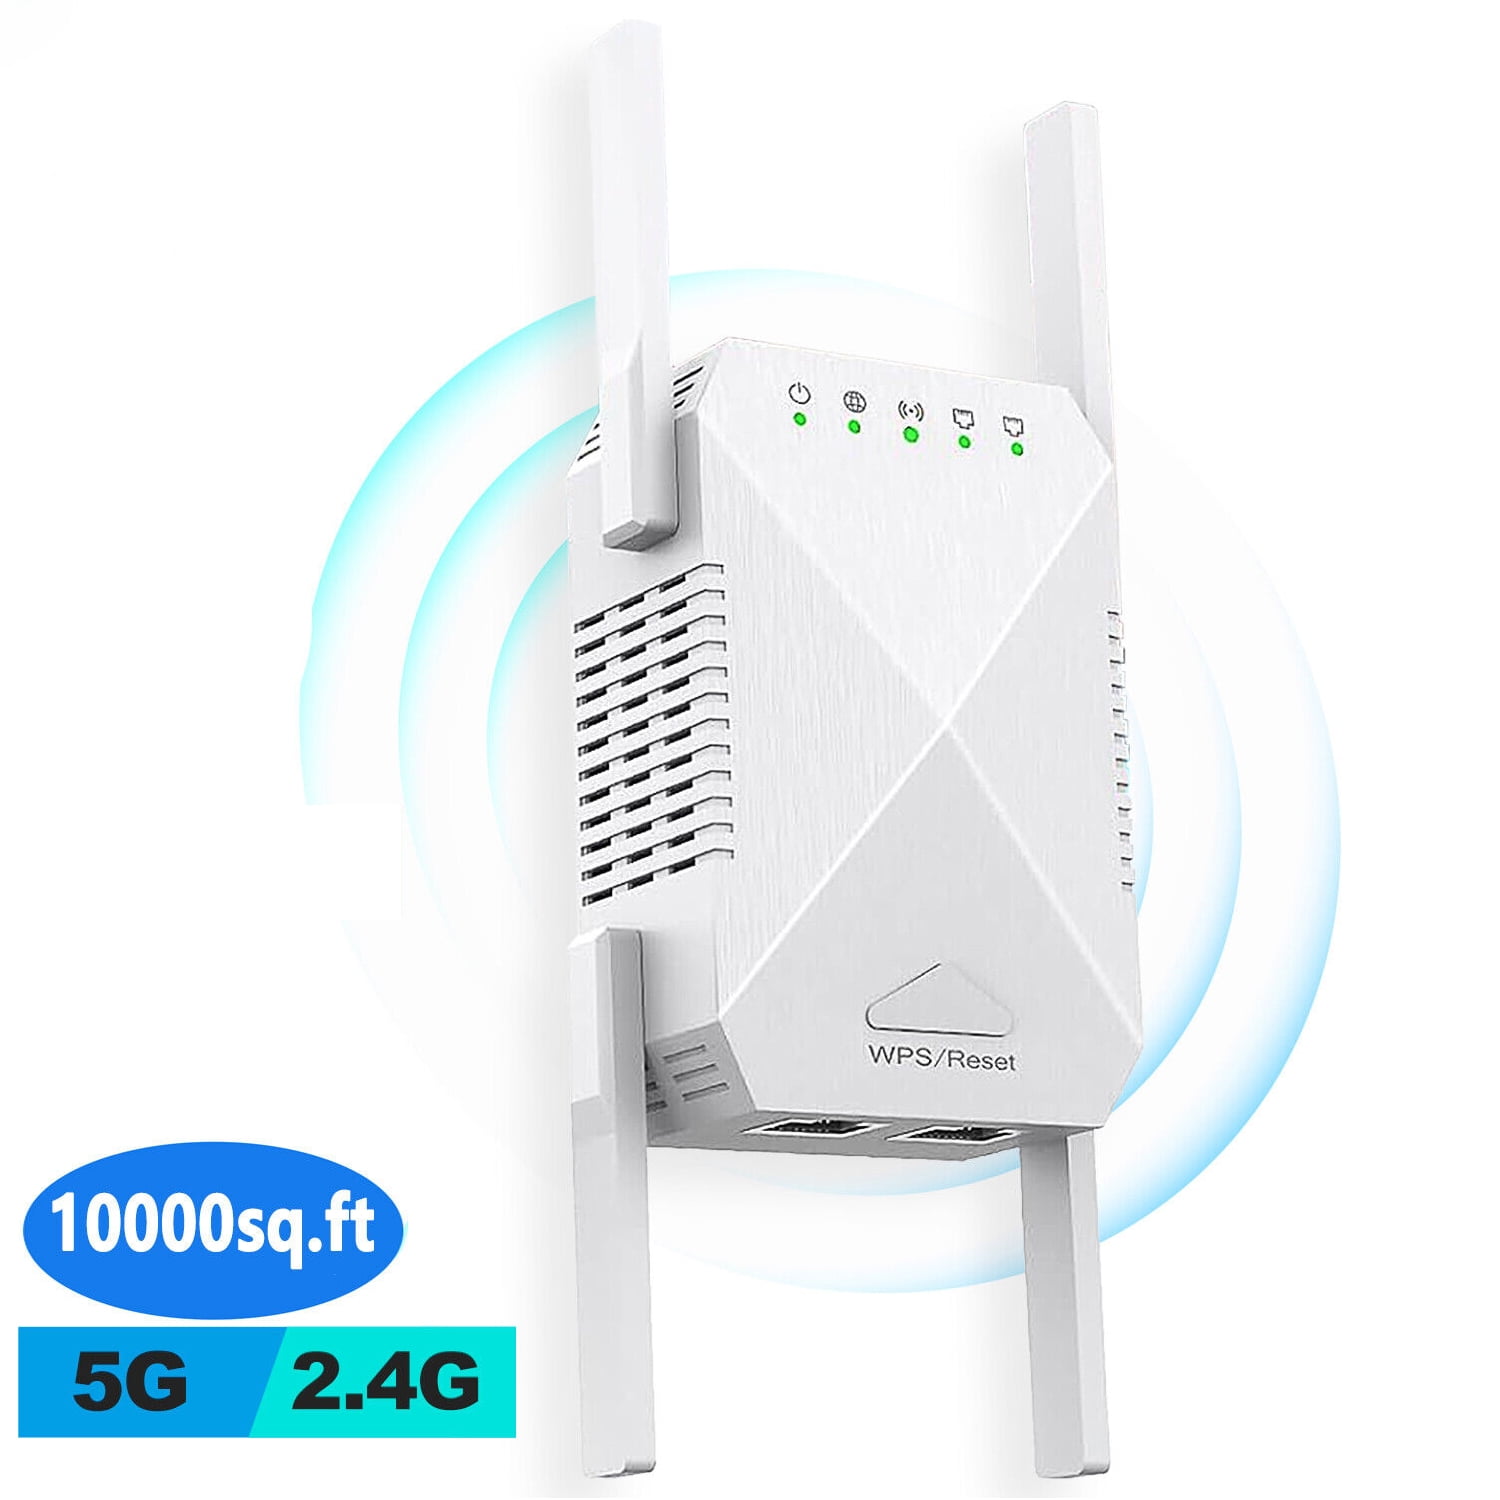 Mini Repeater 300Mbps Wall Wireless Amplifier Repeater7 - Wireless products  - Wireless Networks - Networking